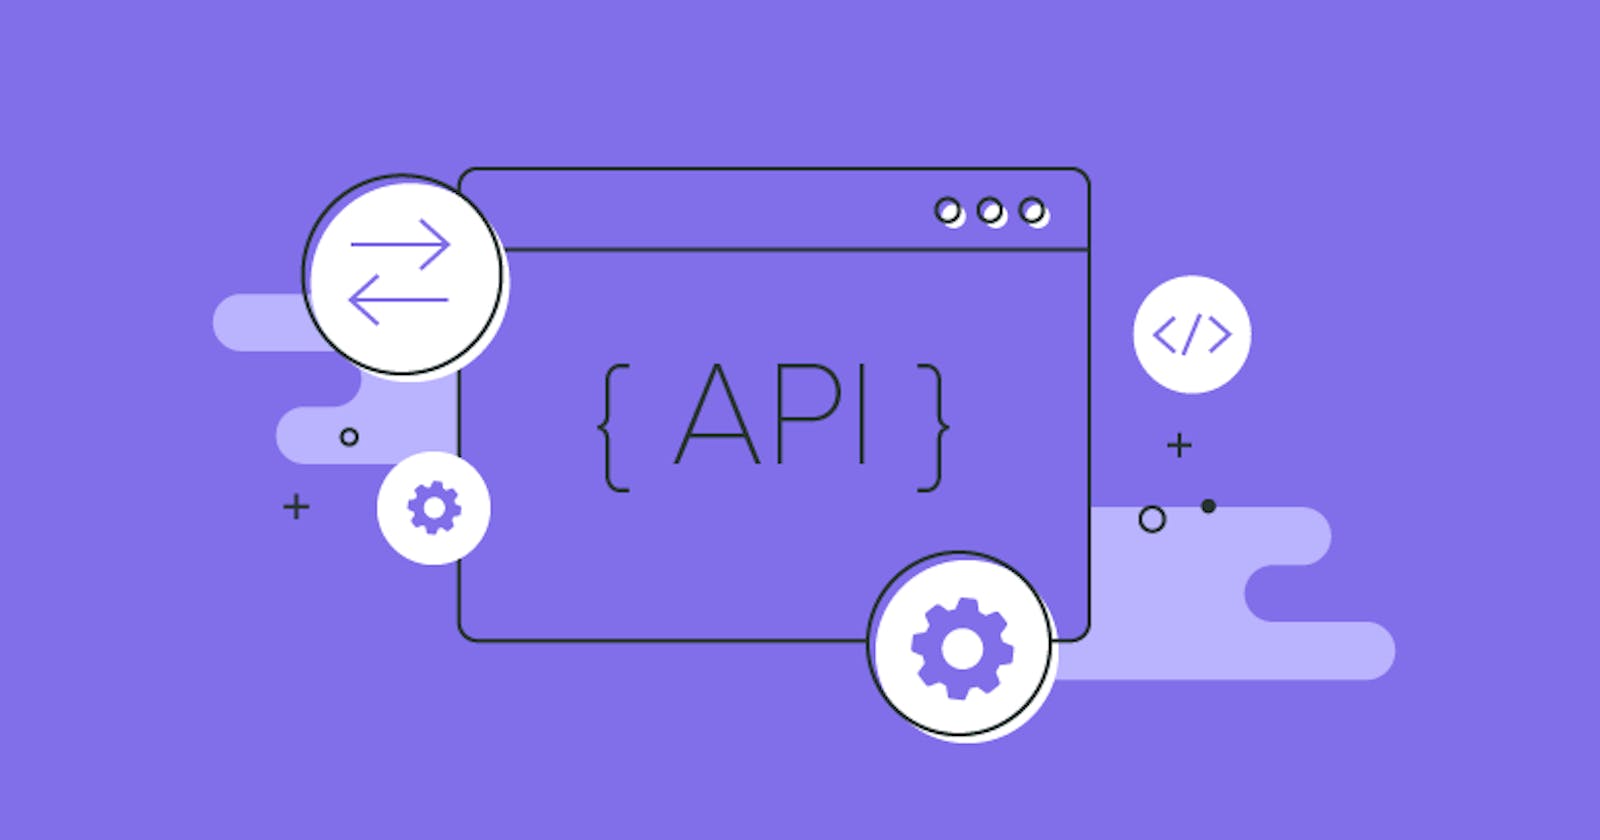 What is an API